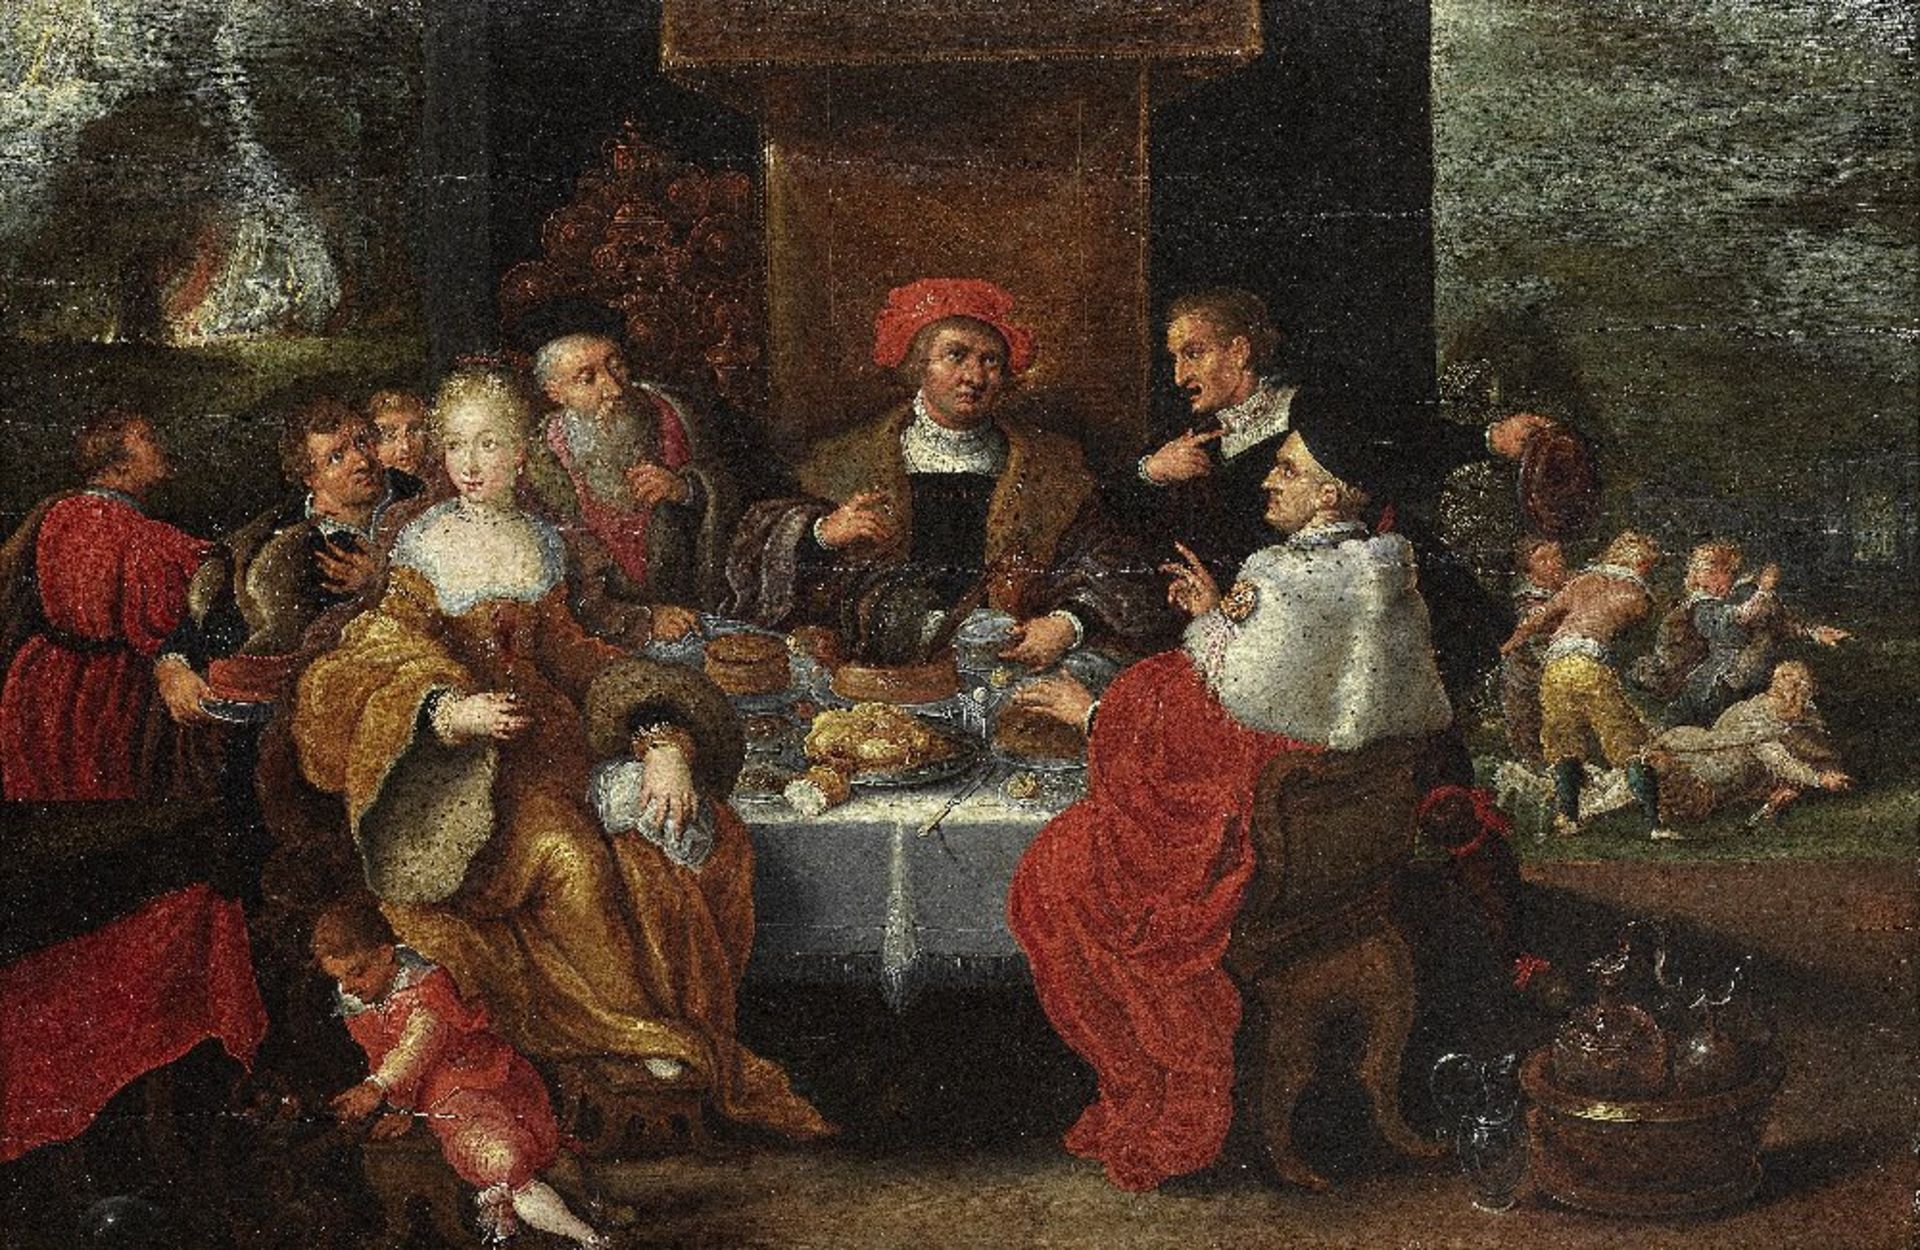 Follower of Frans Francken II (Anvers 1581-1642) The Rich Man and Lazarus